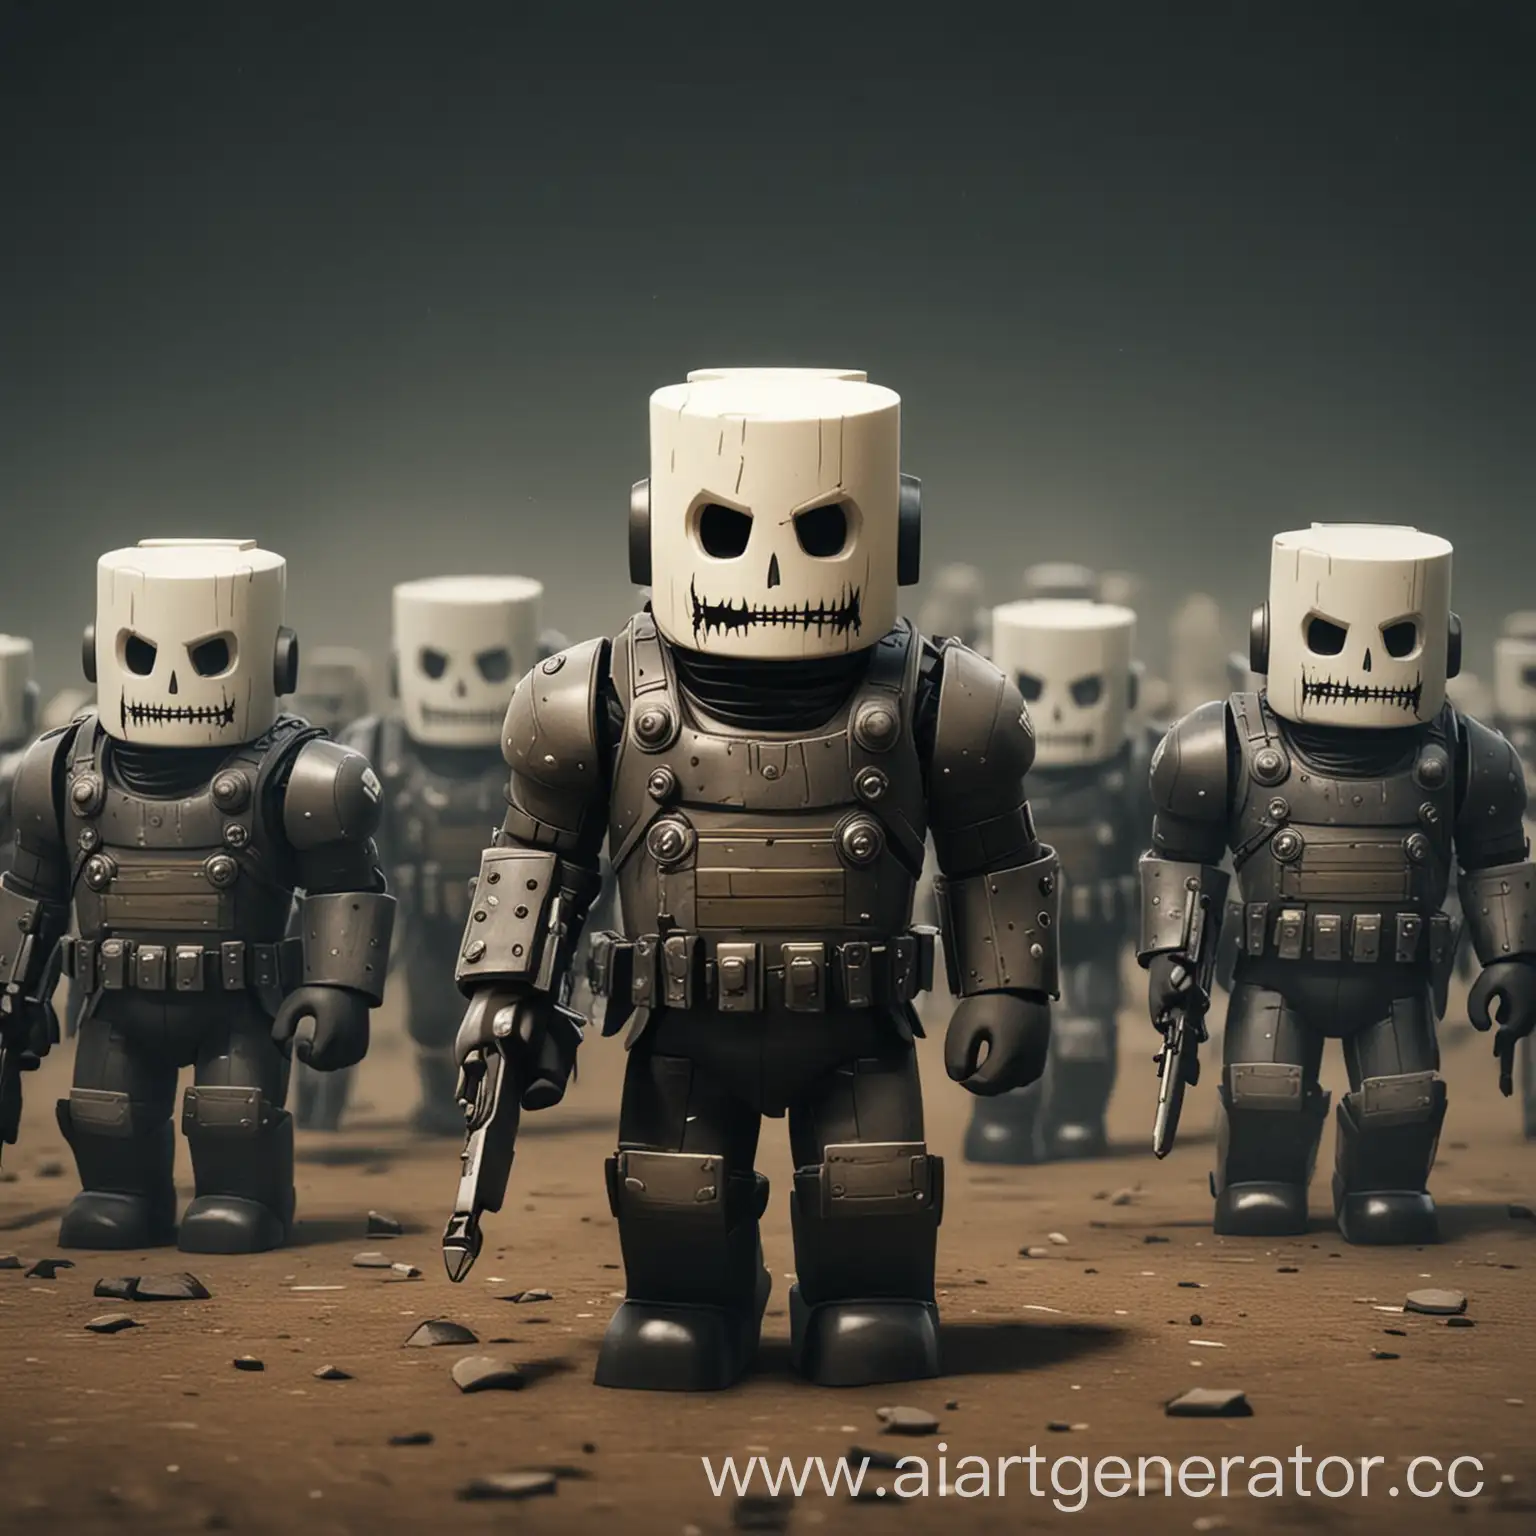 soldiers in the form of Roblox towers are trying to stop Sans from Undertale who is coming towards us